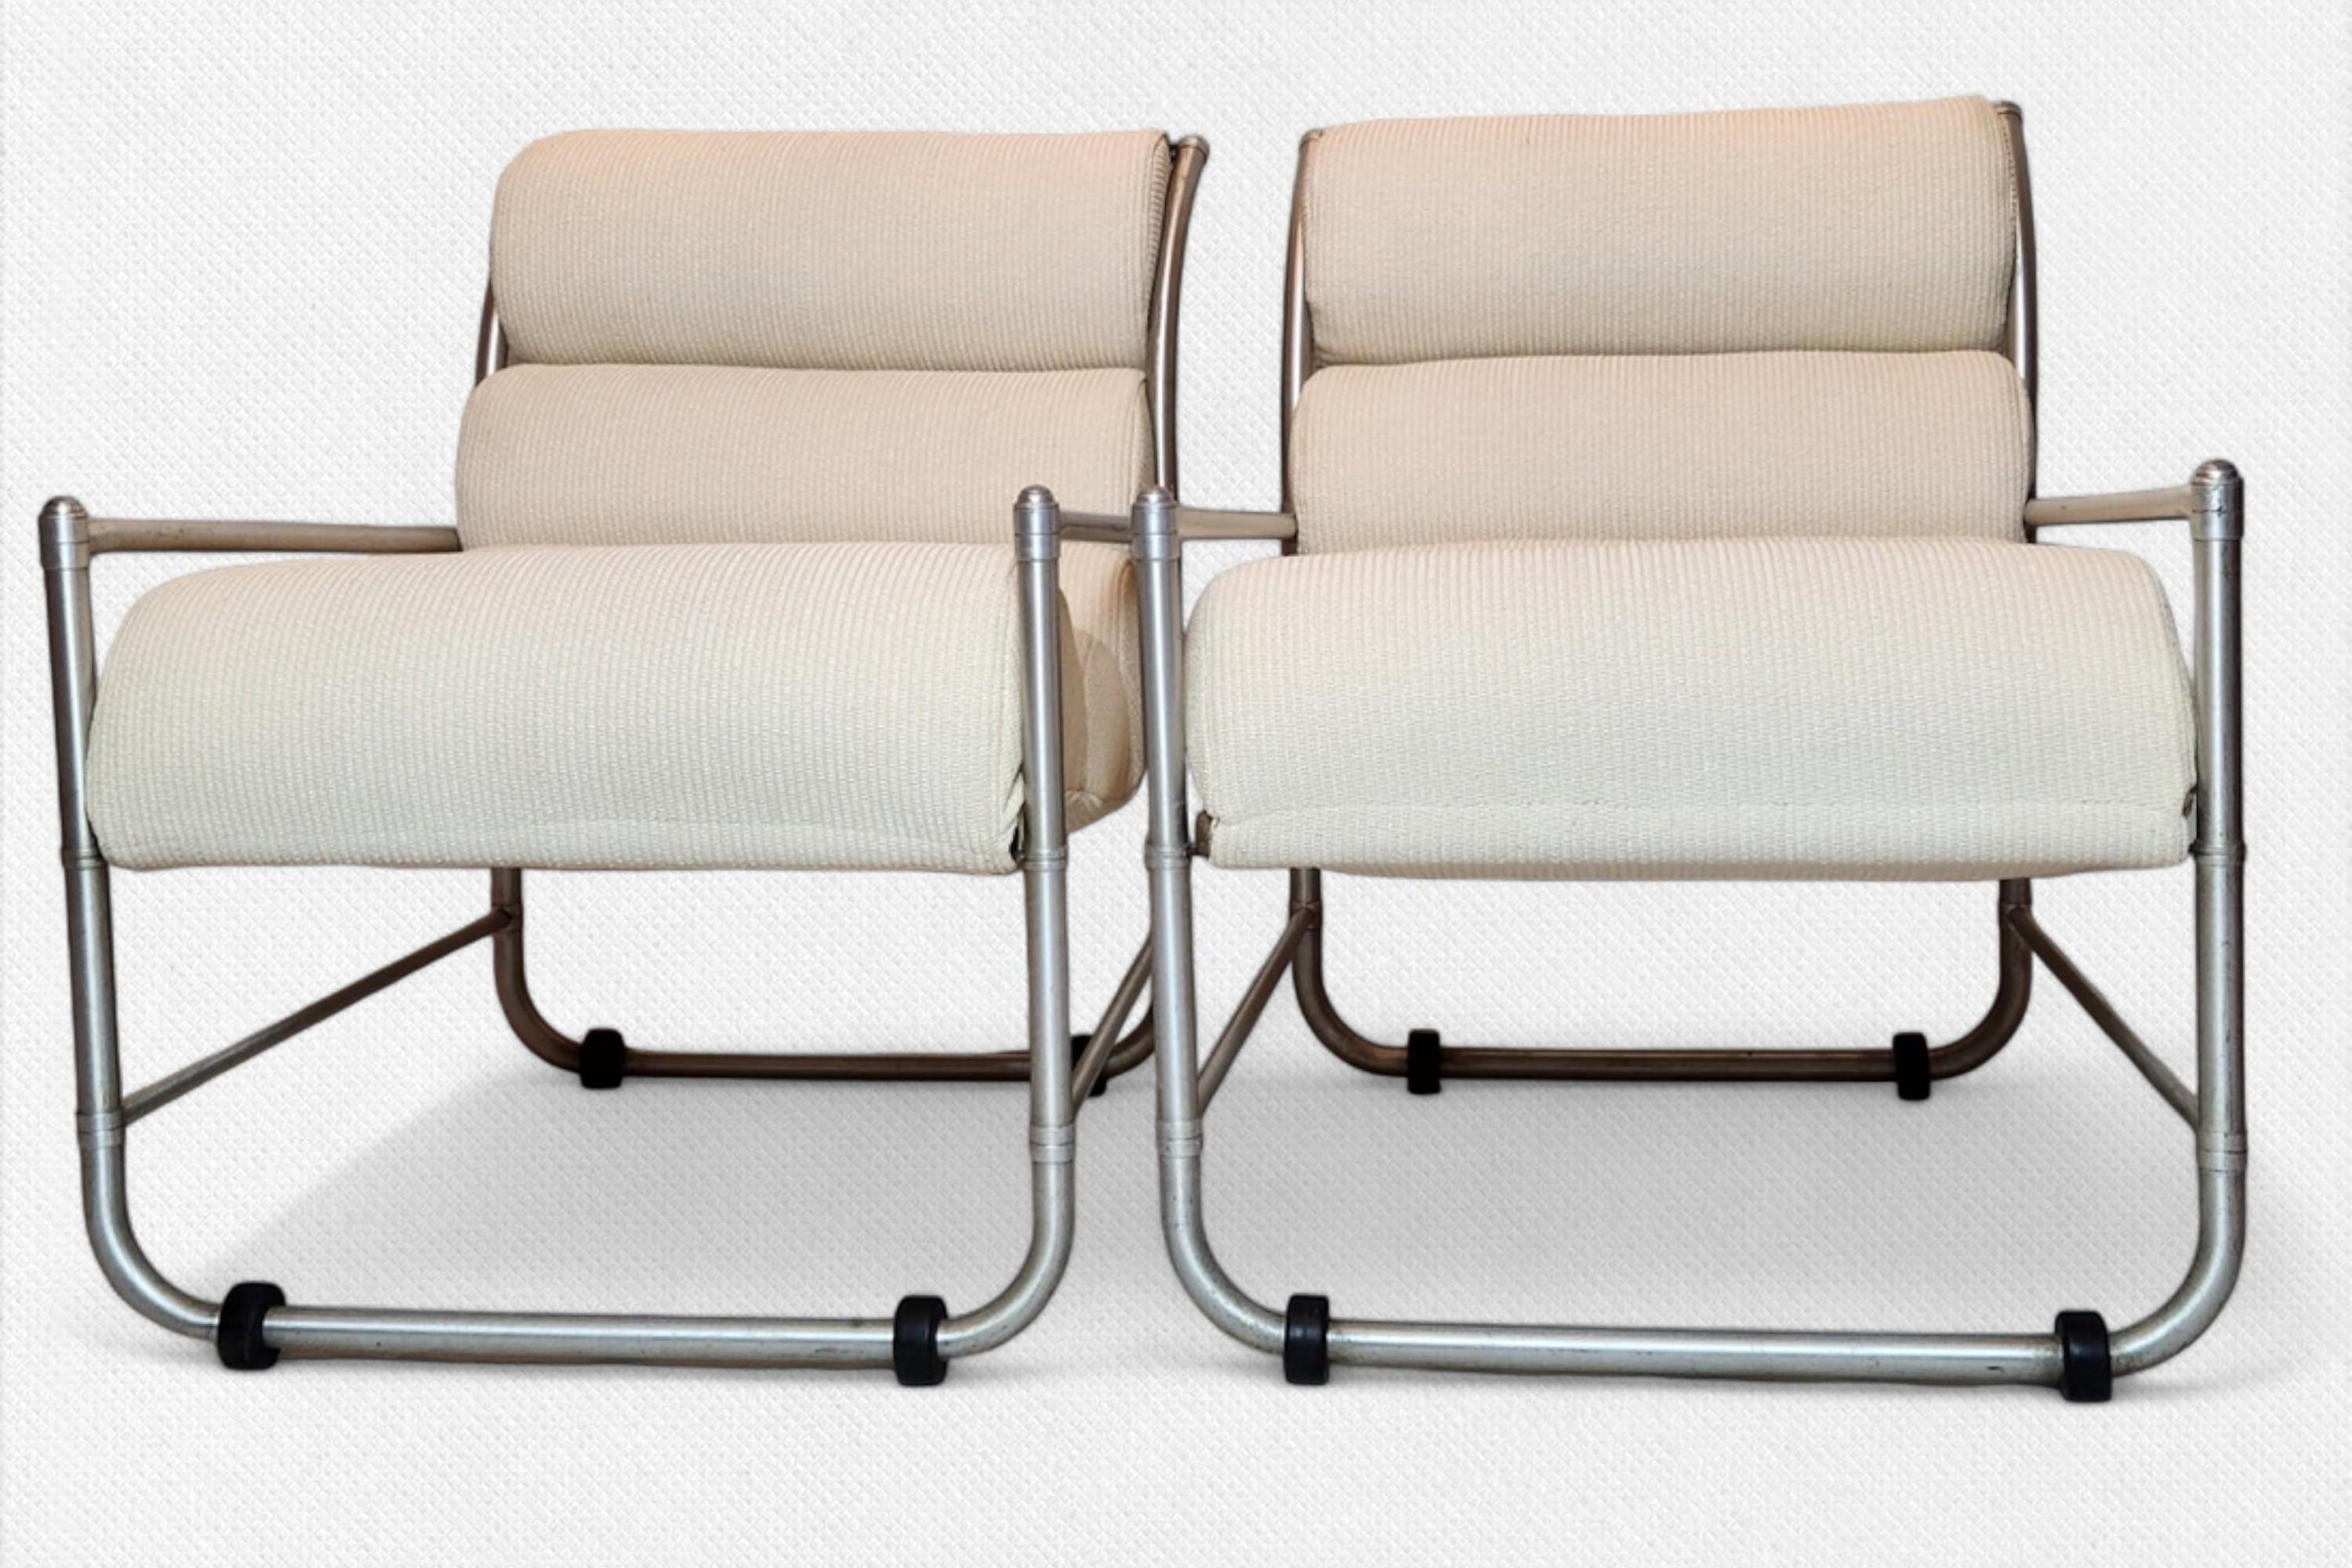 Pair of Aluminum Warren McArthur Sling Chaises / Lounge Chairs, 1938 For Sale 3